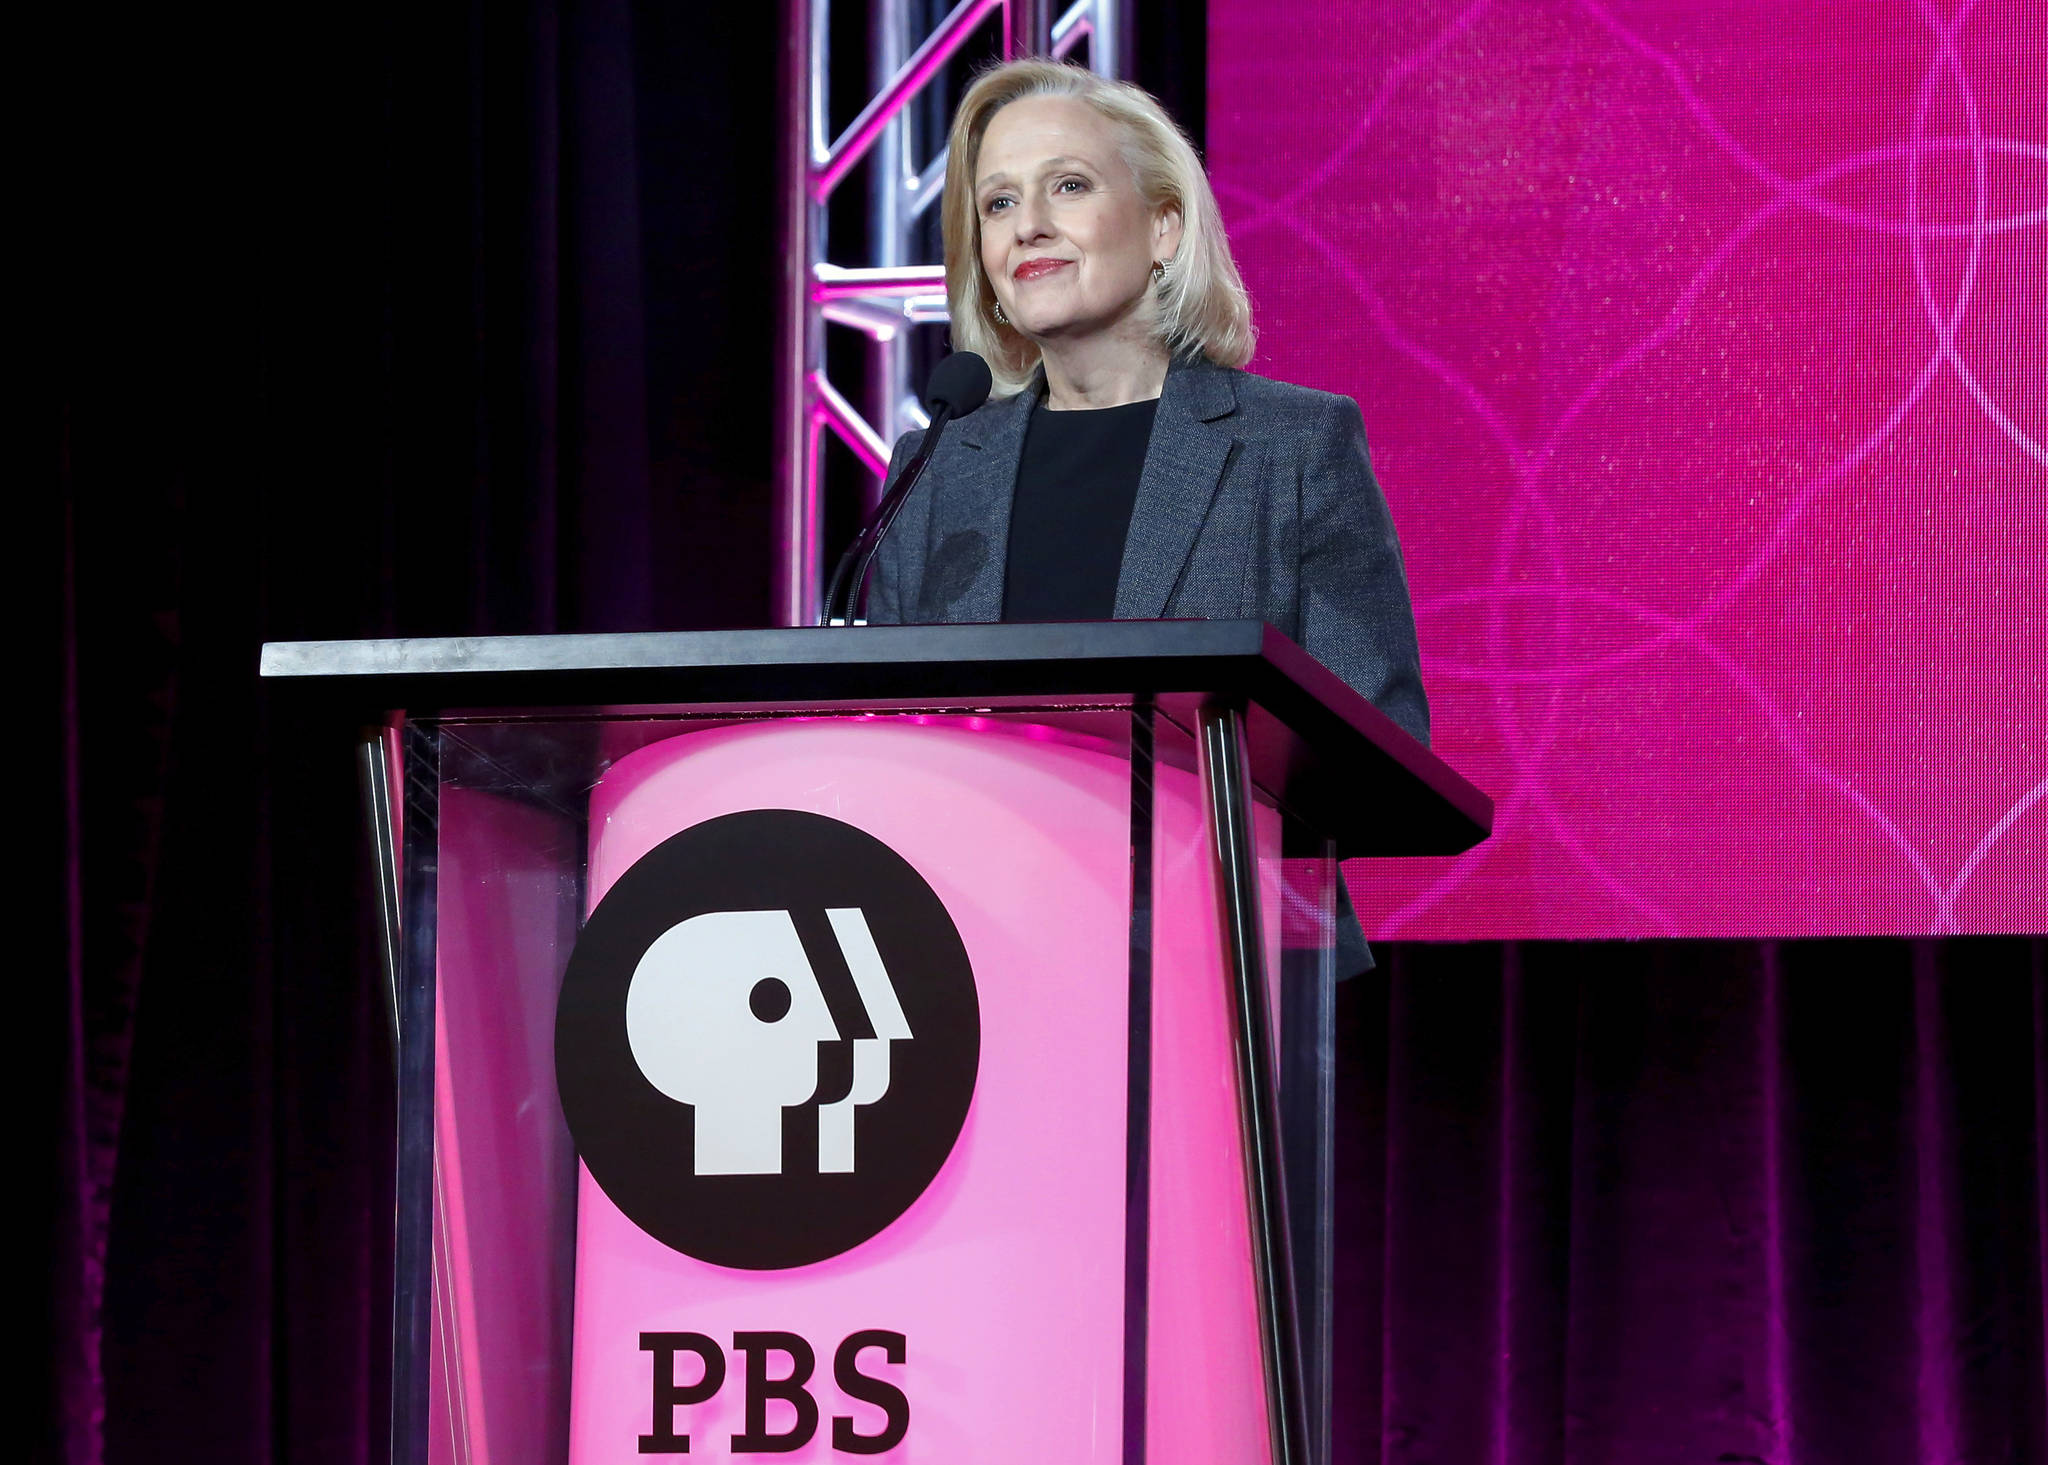 In this Jan. 15 photo, President and CEO Paula Kerger speaks at the PBS’s Executive Session at the 2017 Television Critics Association press tour in Pasadena, California. “We’re celebrating the 50th anniversary of the Public Broadcasting Act, what I think has been the most successful public-private partnership — how ironic it would be if we were defunded this year,” said Kerger. (Willy Sanjuan | Invision)